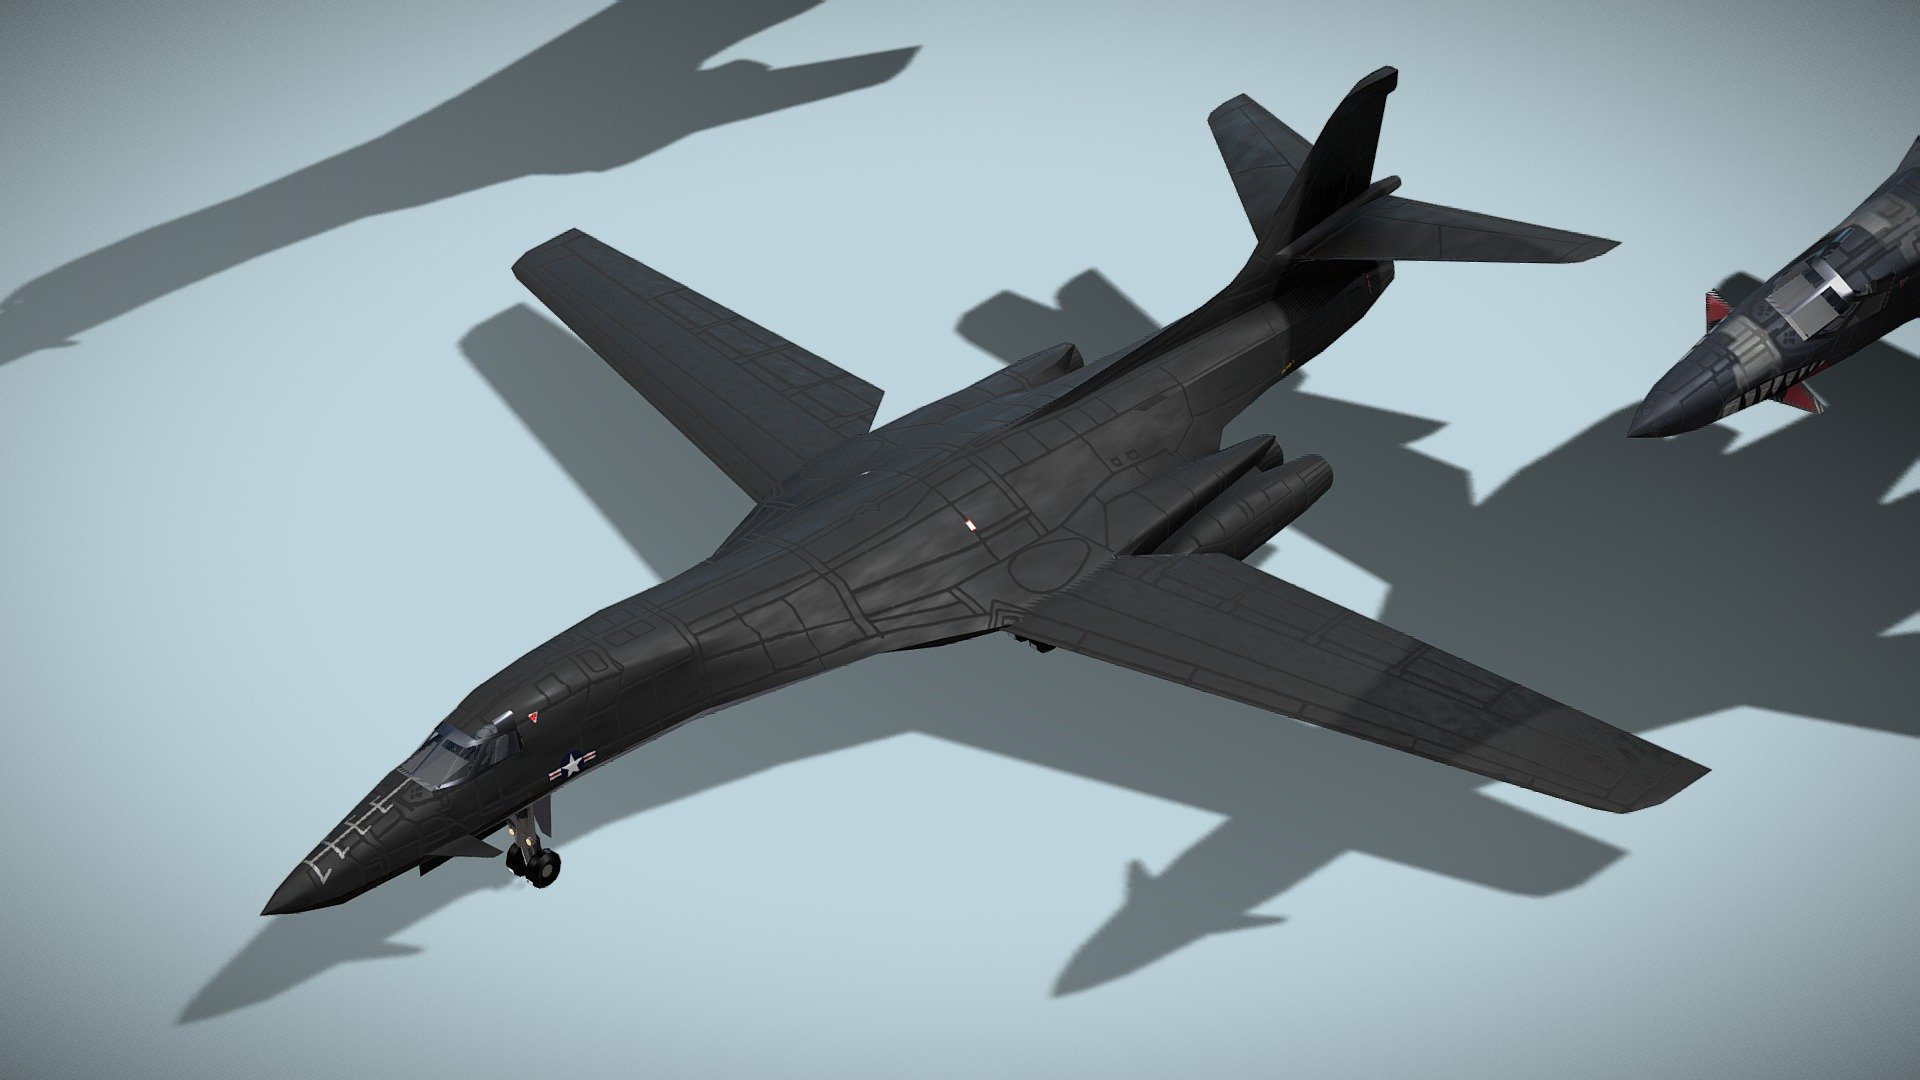 Rockwell B-1B Lancer

Lowpoly model of american strategic bomber



The Rockwell B-1 Lancer is a supersonic variable-sweep wing, heavy bomber used by the United States Air Force. It is commonly called the &ldquo;Bone